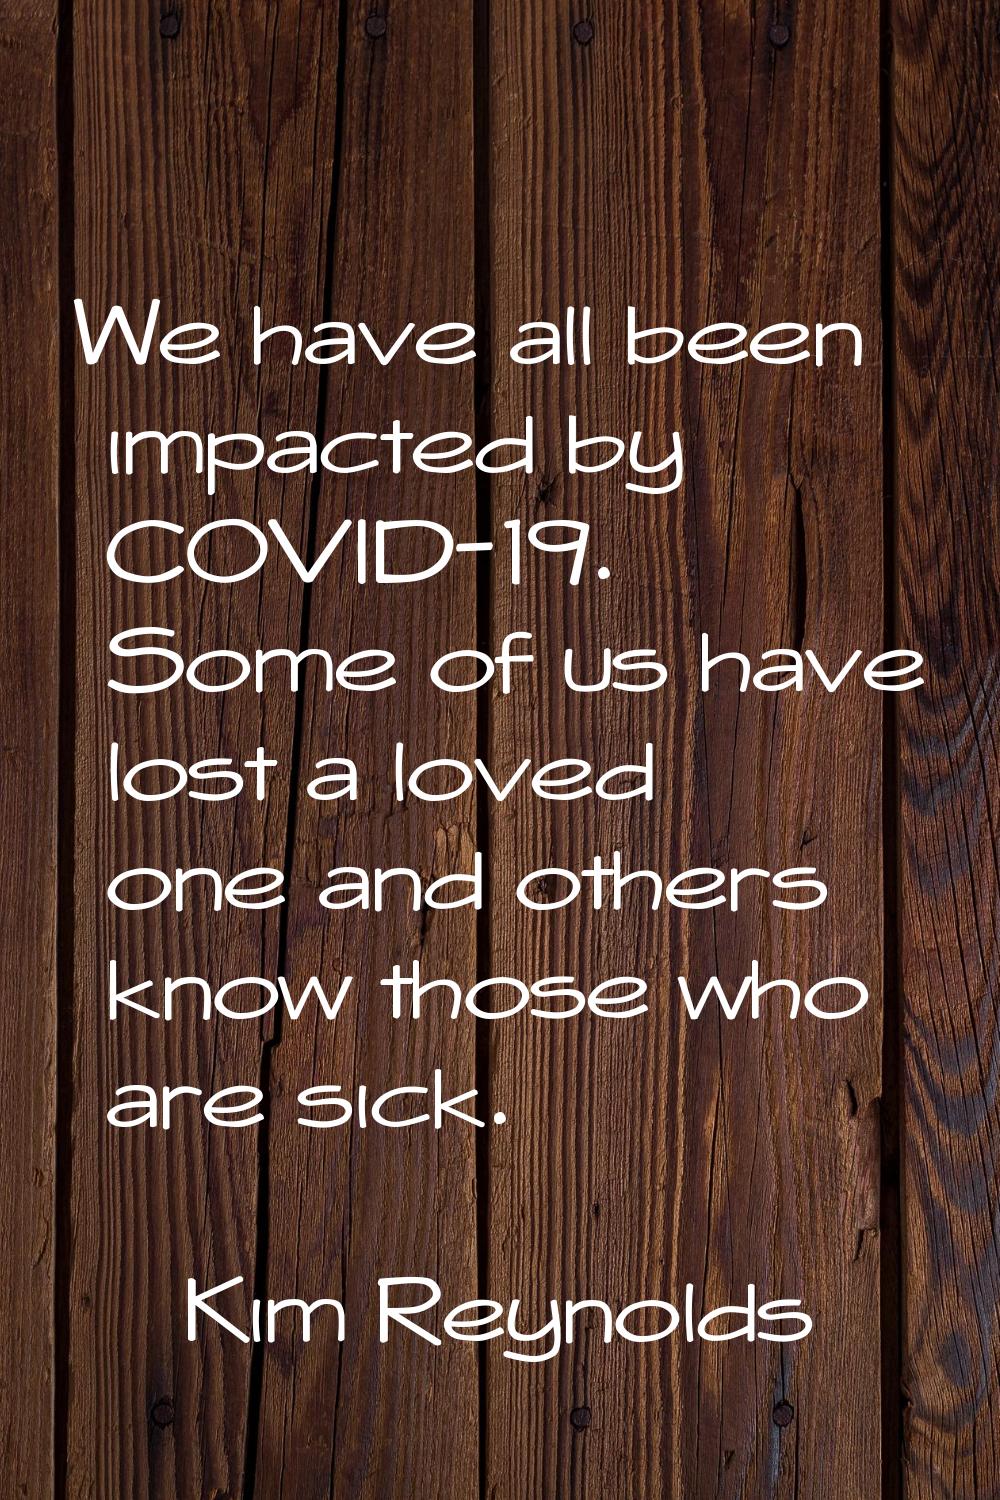 We have all been impacted by COVID-19. Some of us have lost a loved one and others know those who a